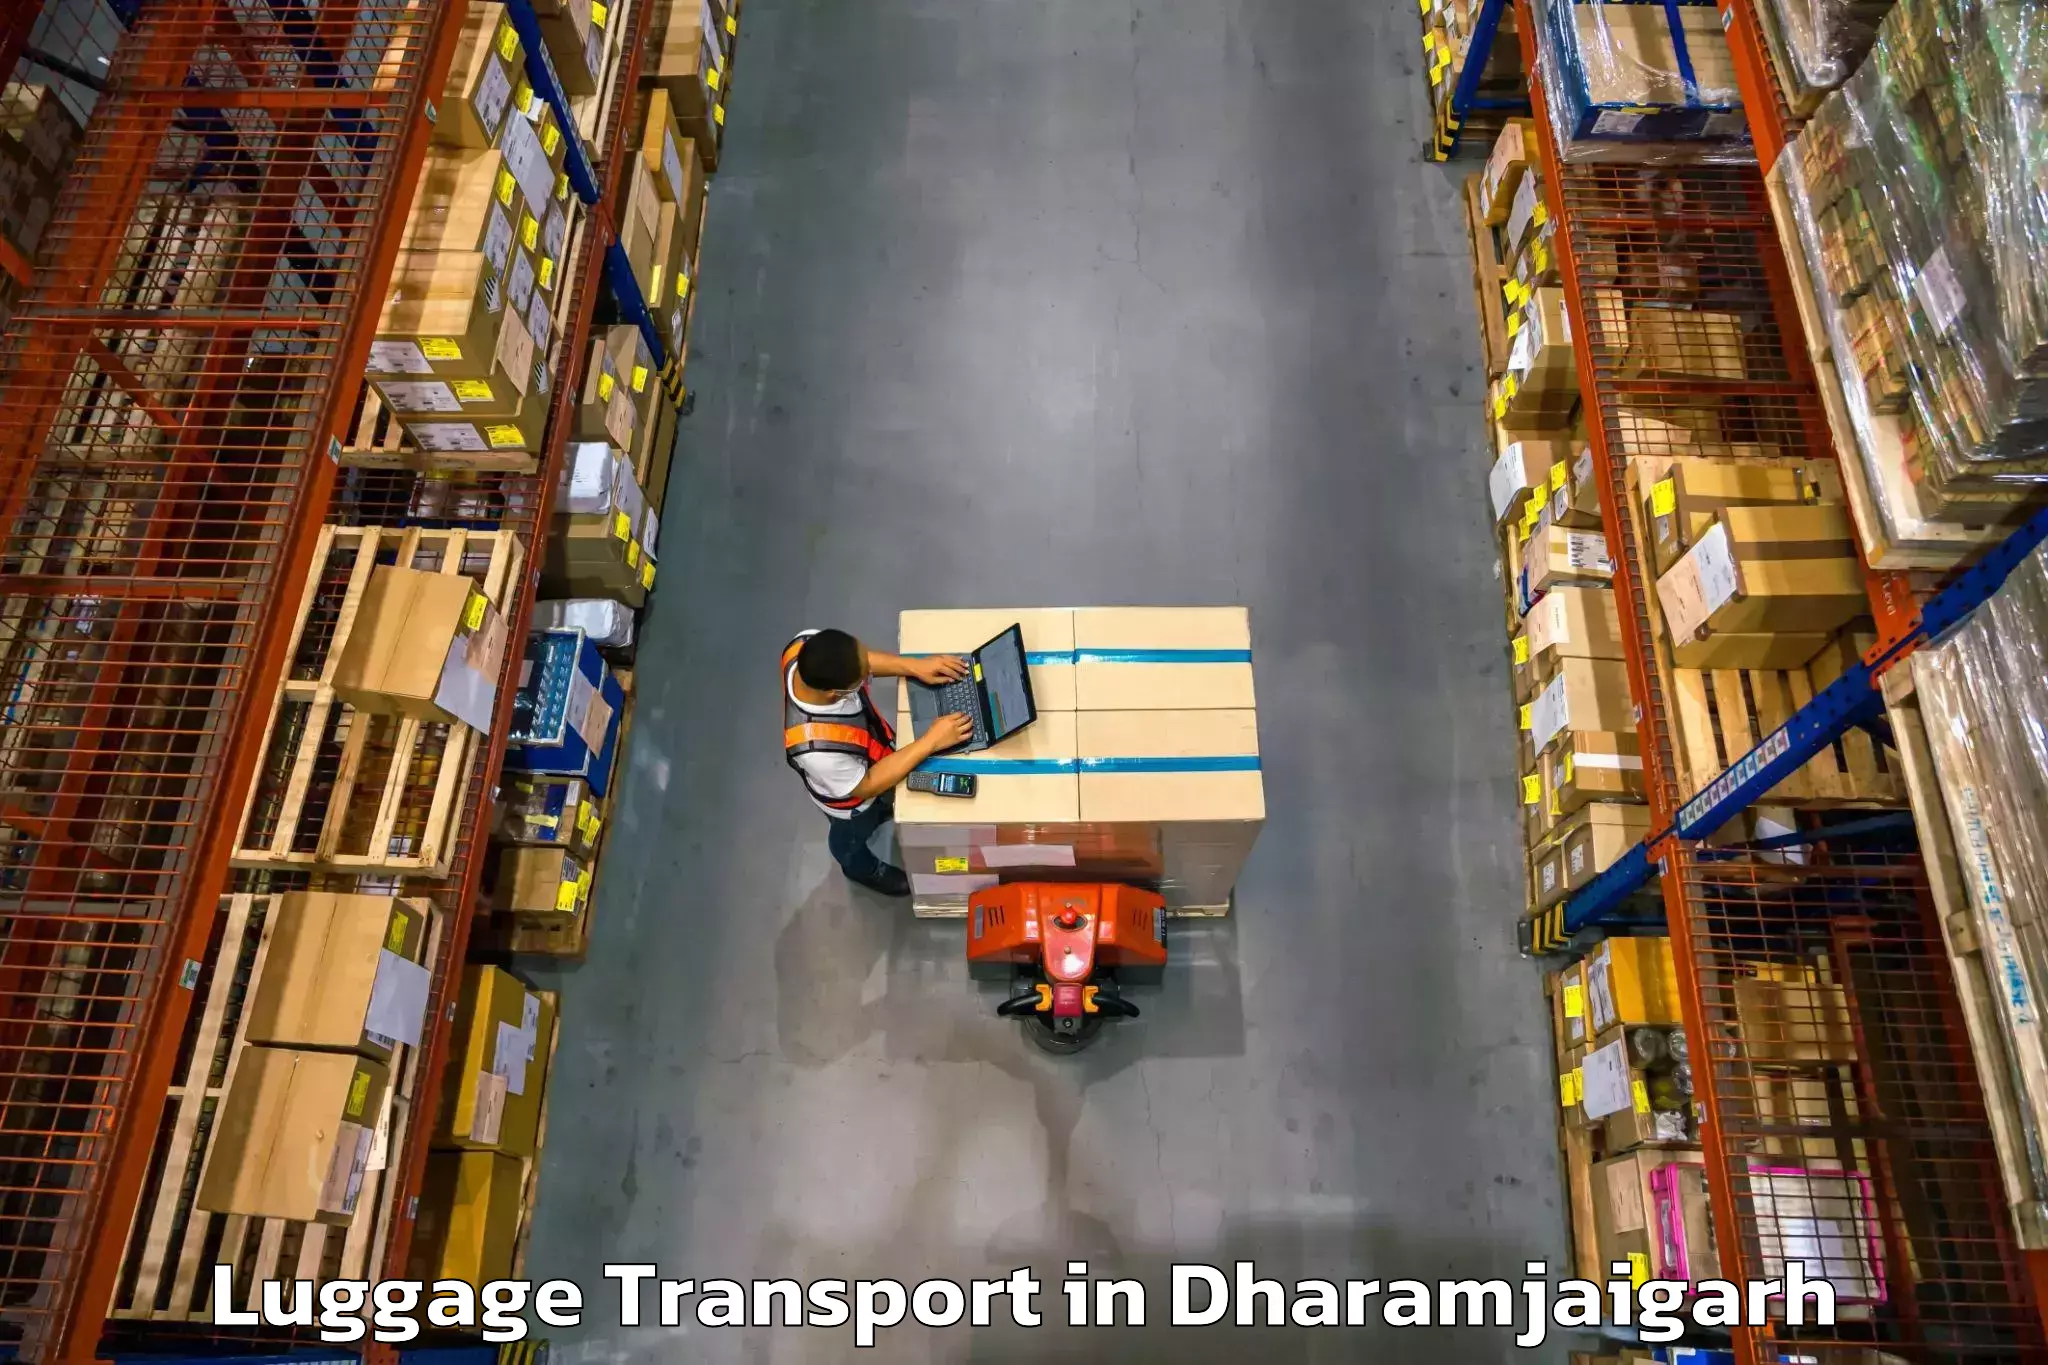 Luggage transport pricing in Dharamjaigarh